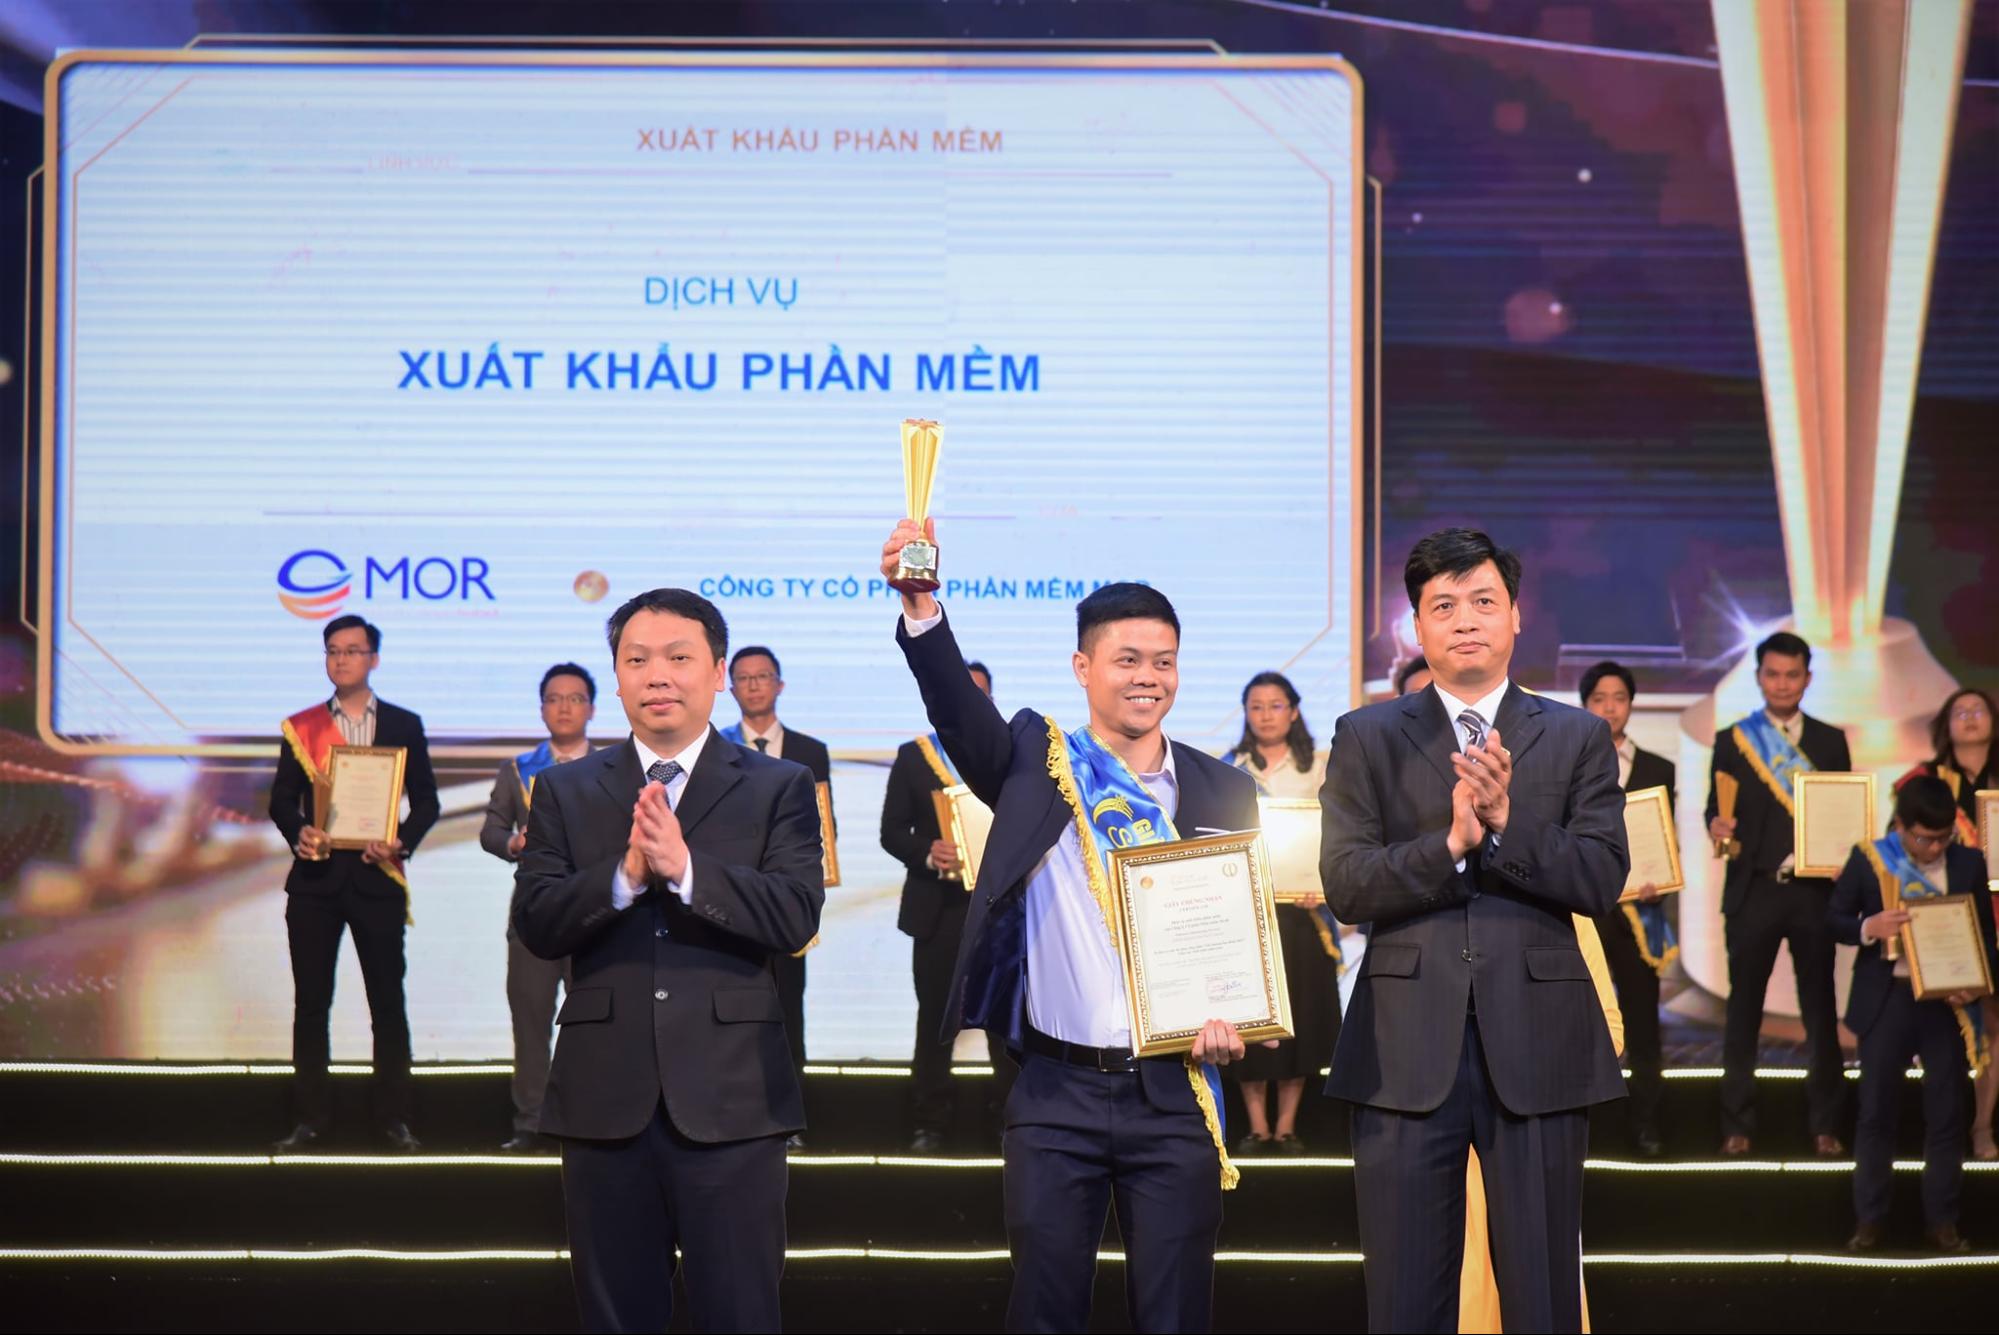 Representative of MOR Software: Mr. Pham Huu Canh - Solutions Director is proudly making a victory sign when receiving the cup